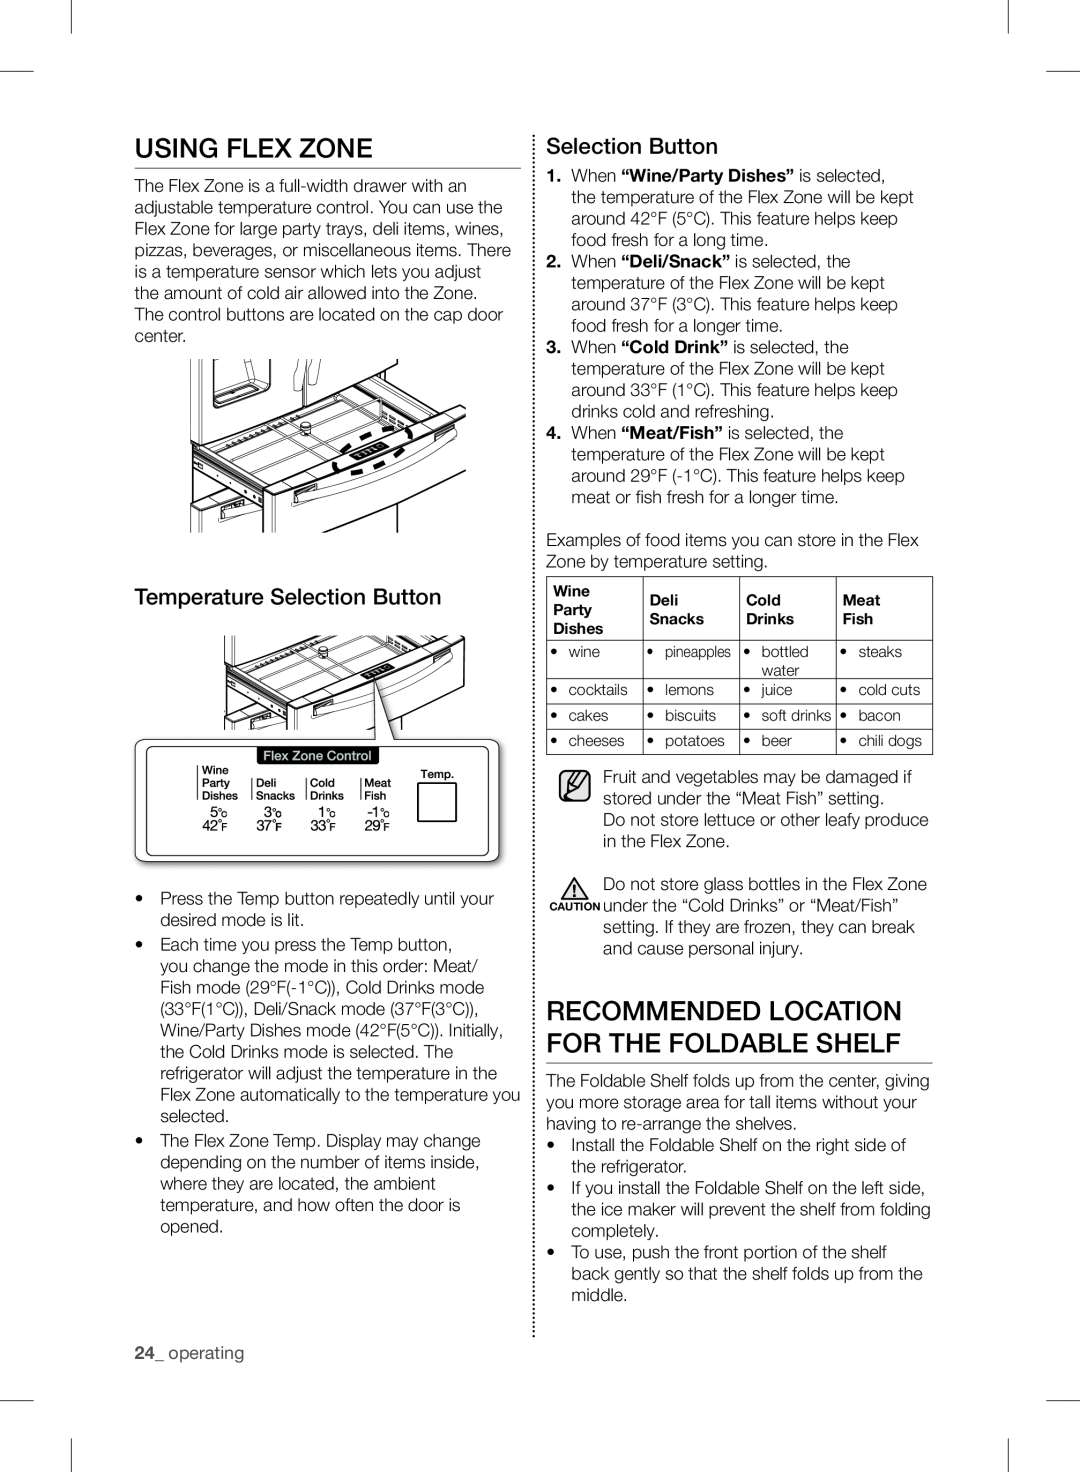 Samsung RF24FSEDBSR user manual Using Flex Zone, Recommended Location For The Foldable Shelf, Temperature Selection Button 